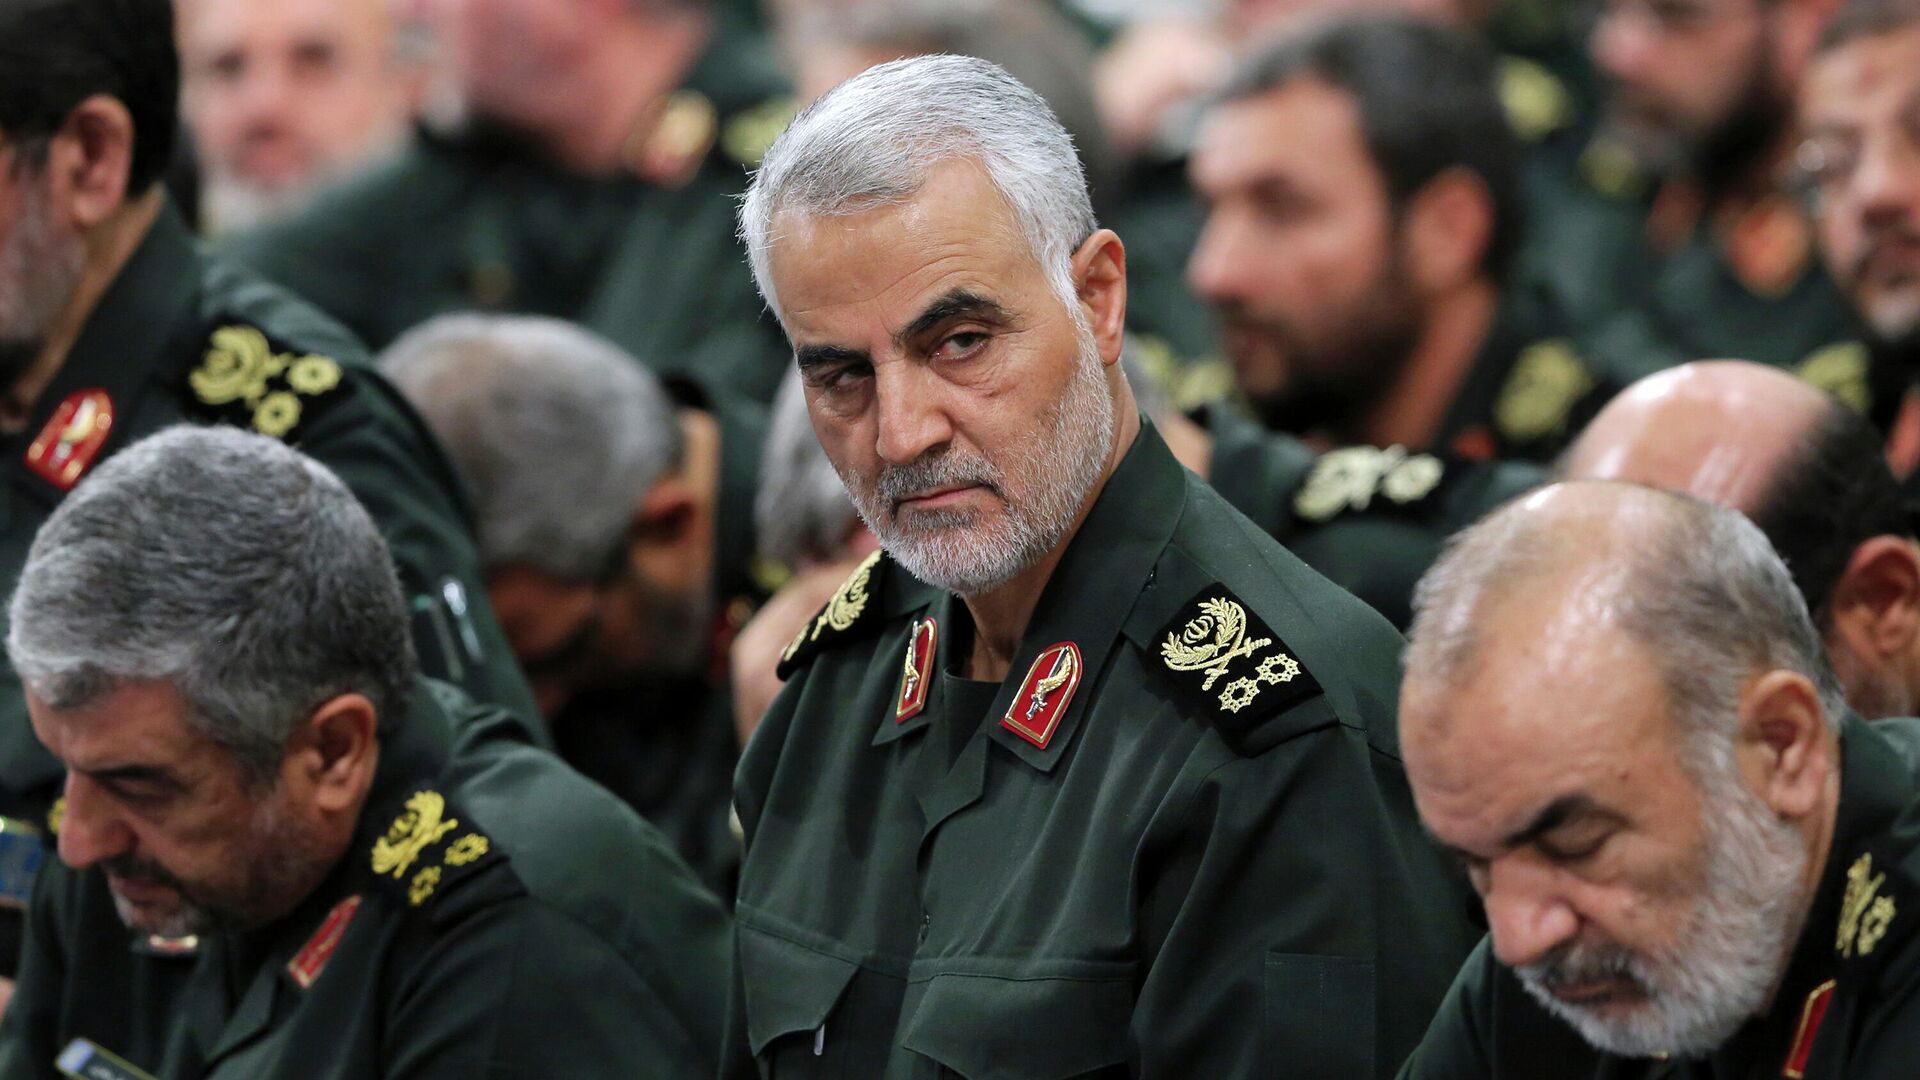 In this Sept. 18, 2016, file photo provided by an official website of the office of the Iranian supreme leader, Revolutionary Guard Gen. Qassem Soleimani, center, attends a meeting in Tehran, Iran. Iran executed Mahmoud Mousavi Majd convicted of providing information to the United States and Israel about the prominent Revolutionary Guard general later killed by a U.S. drone strike, state TV reported on Monday, July 20, 2020. (Office of the Iranian Supreme Leader via AP, File) - Sputnik International, 1920, 31.12.2021